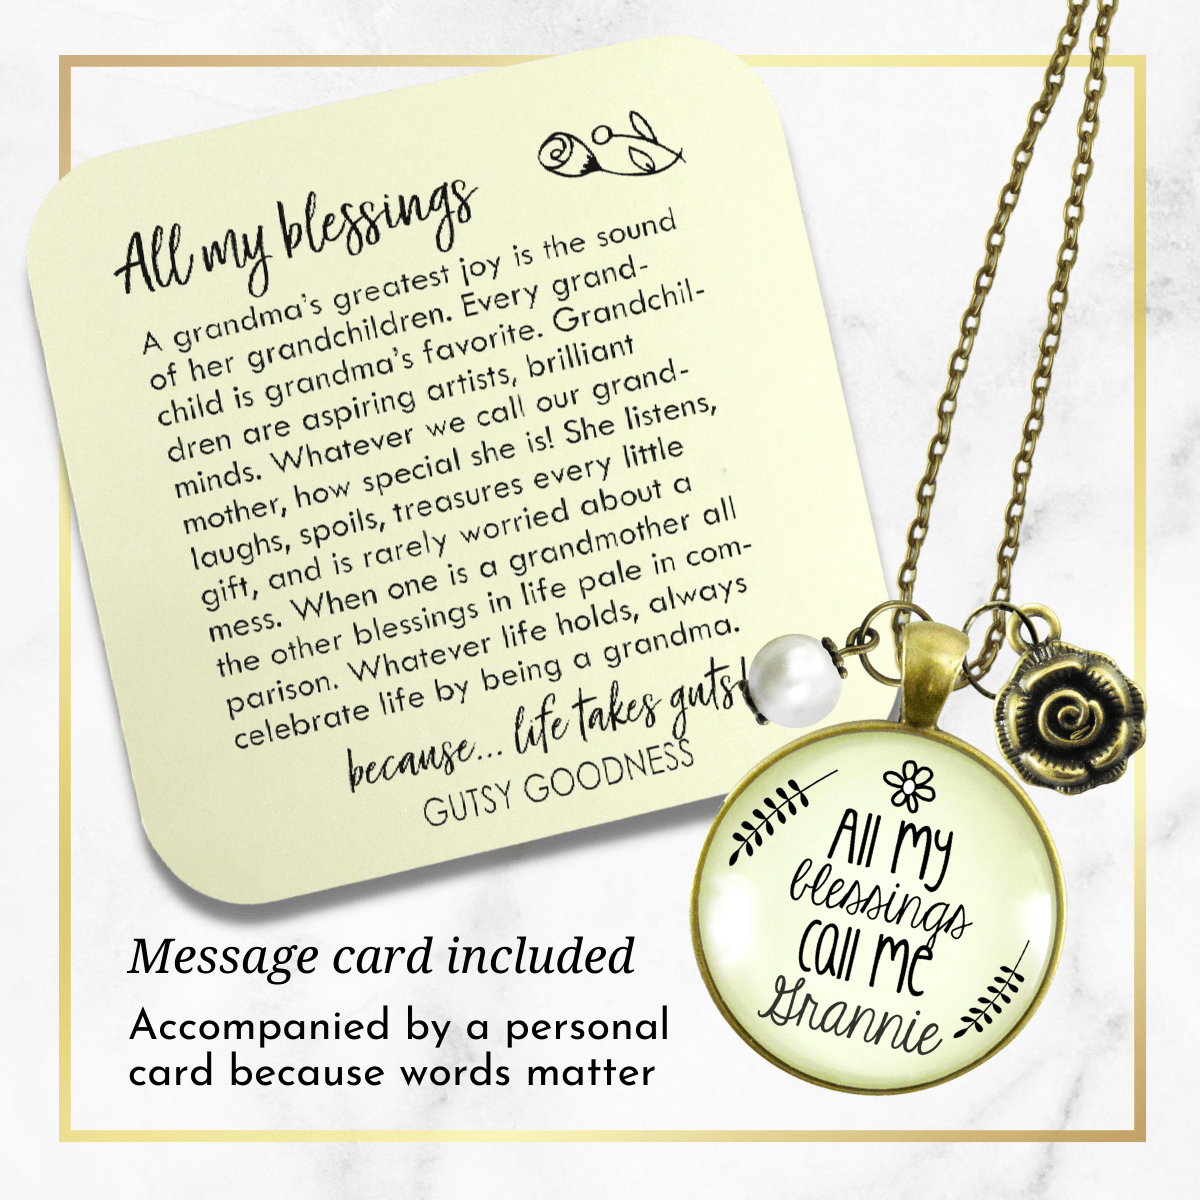 Gutsy Goodness Grannie Necklace All My Blessings Meaningful Grandma Gift Charm Jewelry 24" - Gutsy Goodness;Grannie Necklace All My Blessings Meaningful Grandma Gift Charm Jewelry 24" - Gutsy Goodness Handmade Jewelry Gifts